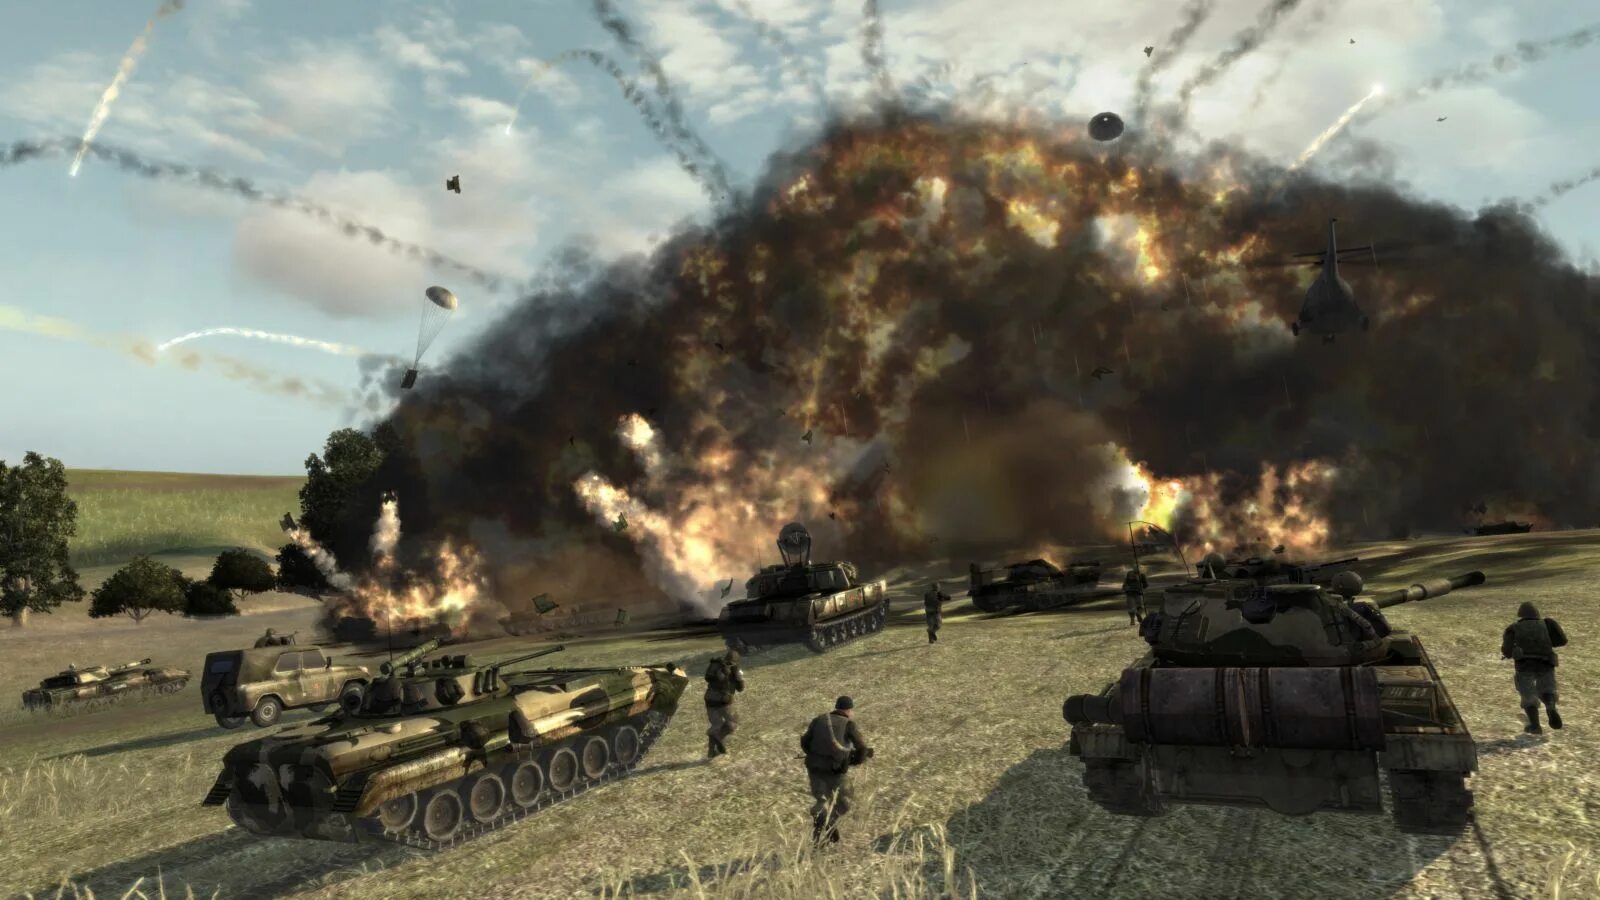 Игра World in Conflict. World in Conflict 2022. World in Conflict 3 игра. World in Conflict 2021. Conflict only